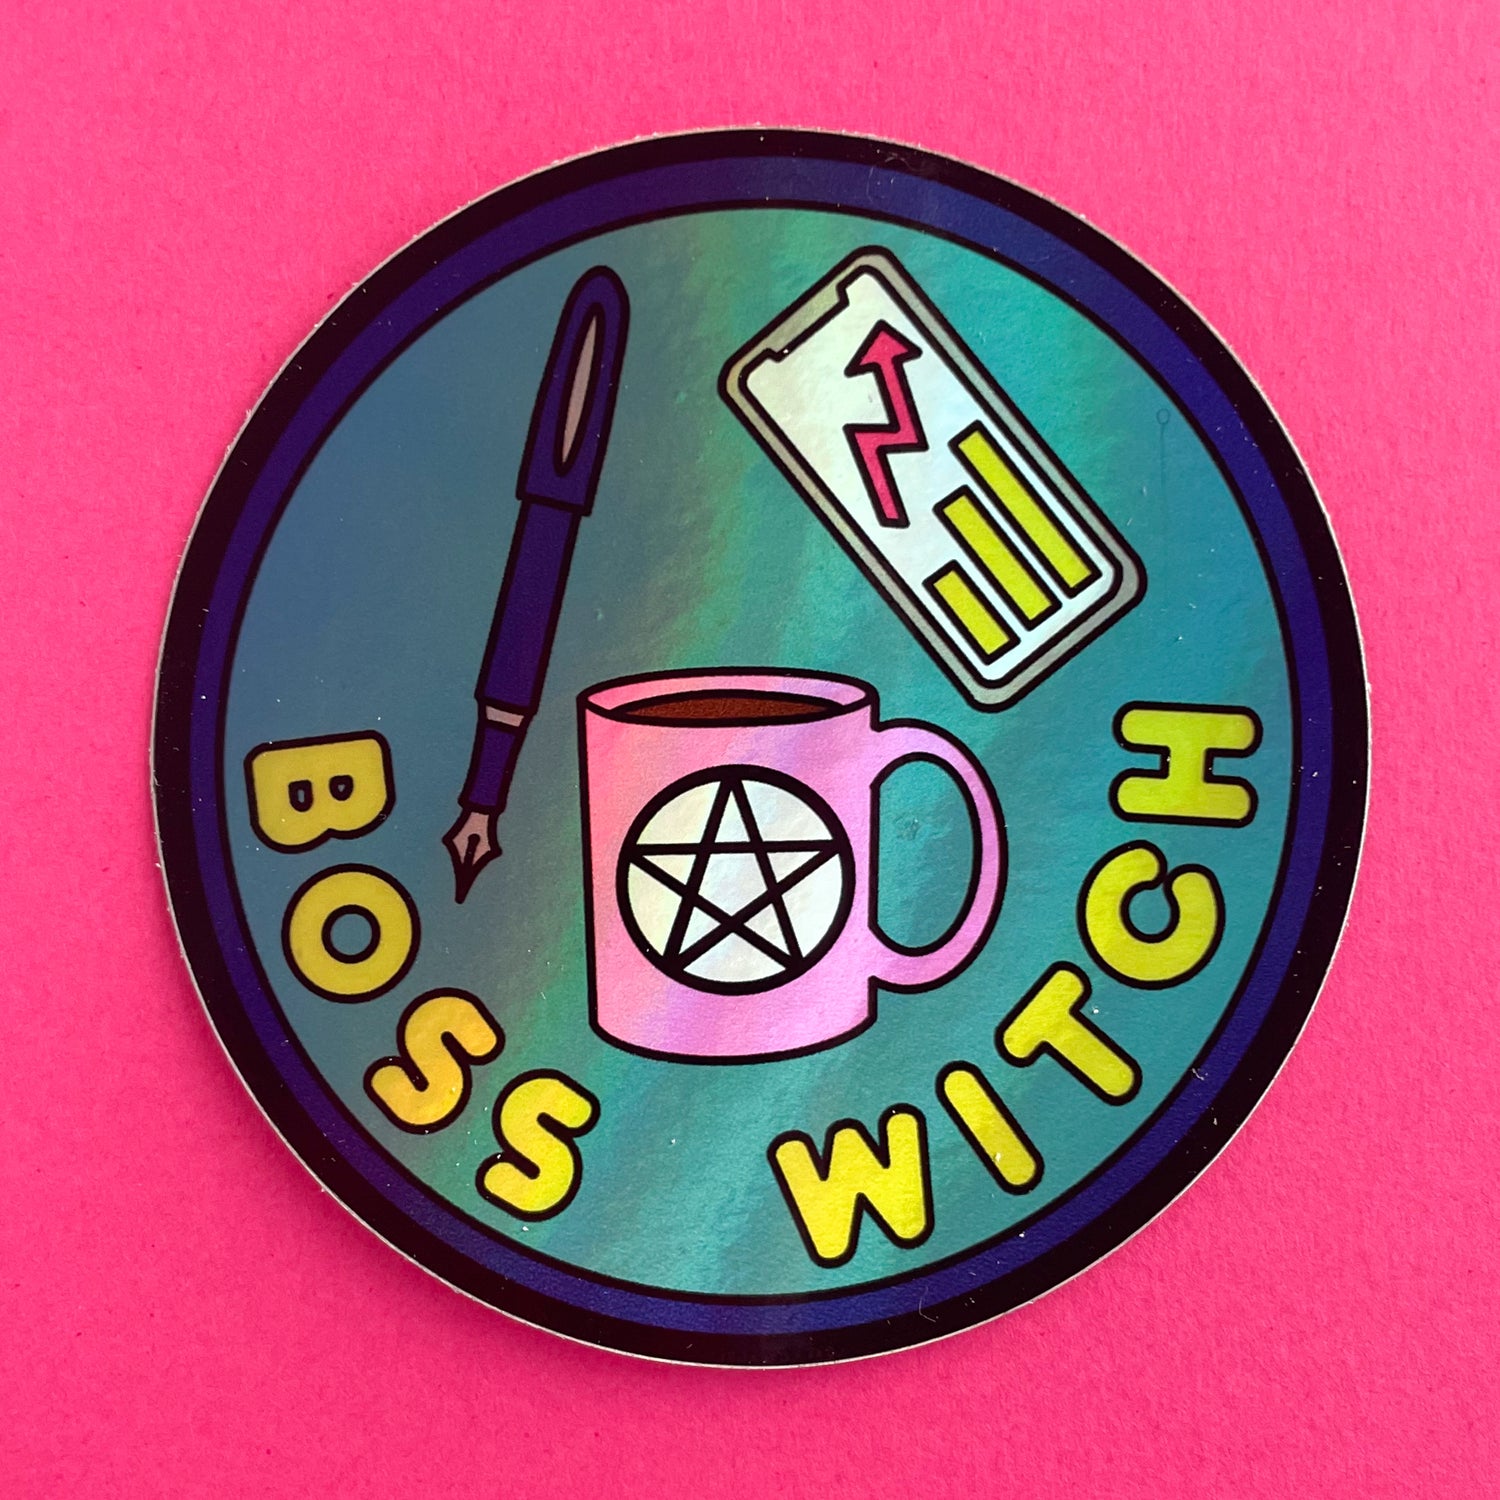 A circular holographic sticker. It has a dark purple border with lime green text that reads "Boss Witch". There is a pink coffee cup with a pentacle on it, a purple fountain pen, and a phone with a business graph depicted above the words. The sticker is on a hot pink background